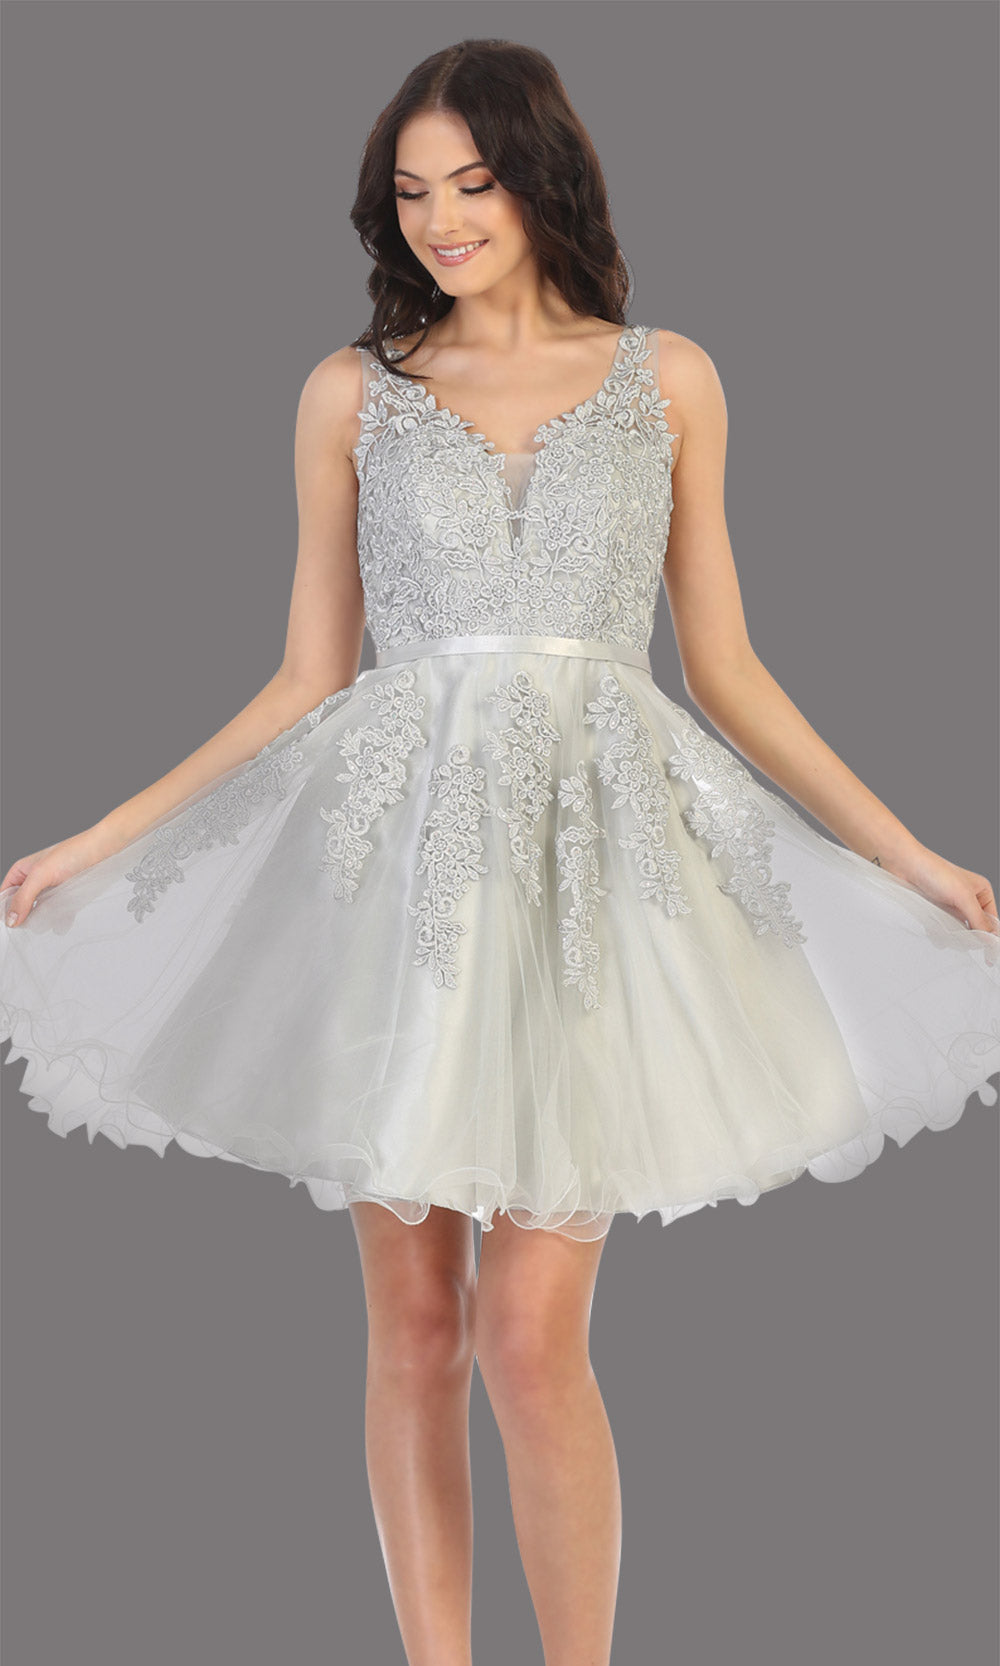 Mayqueen Mq1692 short silver gray flowy v neck simple lace grade 8 graduation dress w/ wide straps. This light grey party dress is perfect for prom, graduation, grade 8 grad, confirmation dress, bat mitzvah dress, damas. Plus sizes avail.jpggrade 8 grad dresses, graduation dresses